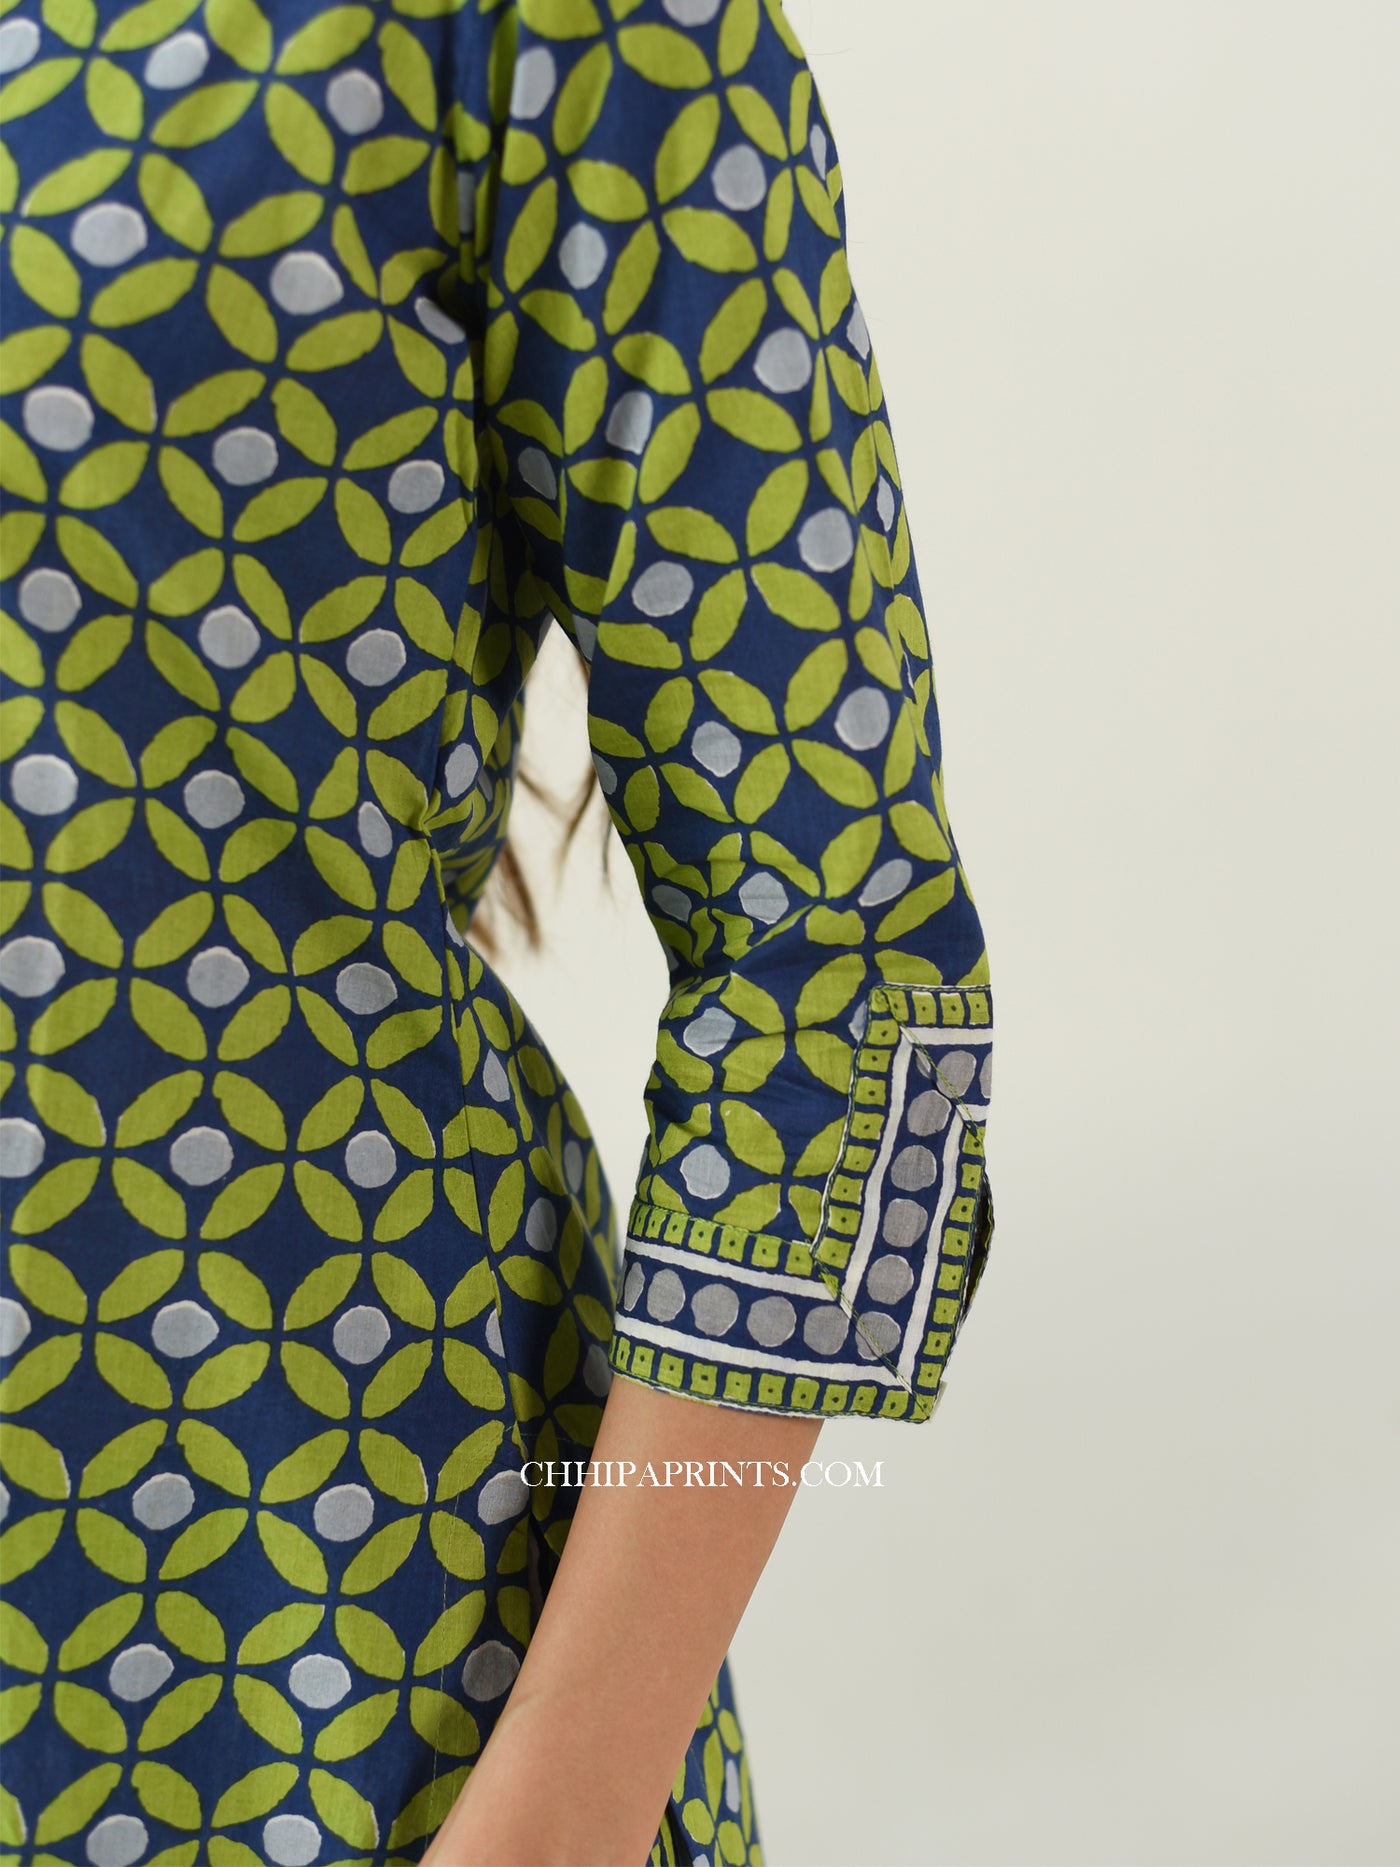 Cotton Geometric Print Suit Set In Shades Of Green And Navy Blue